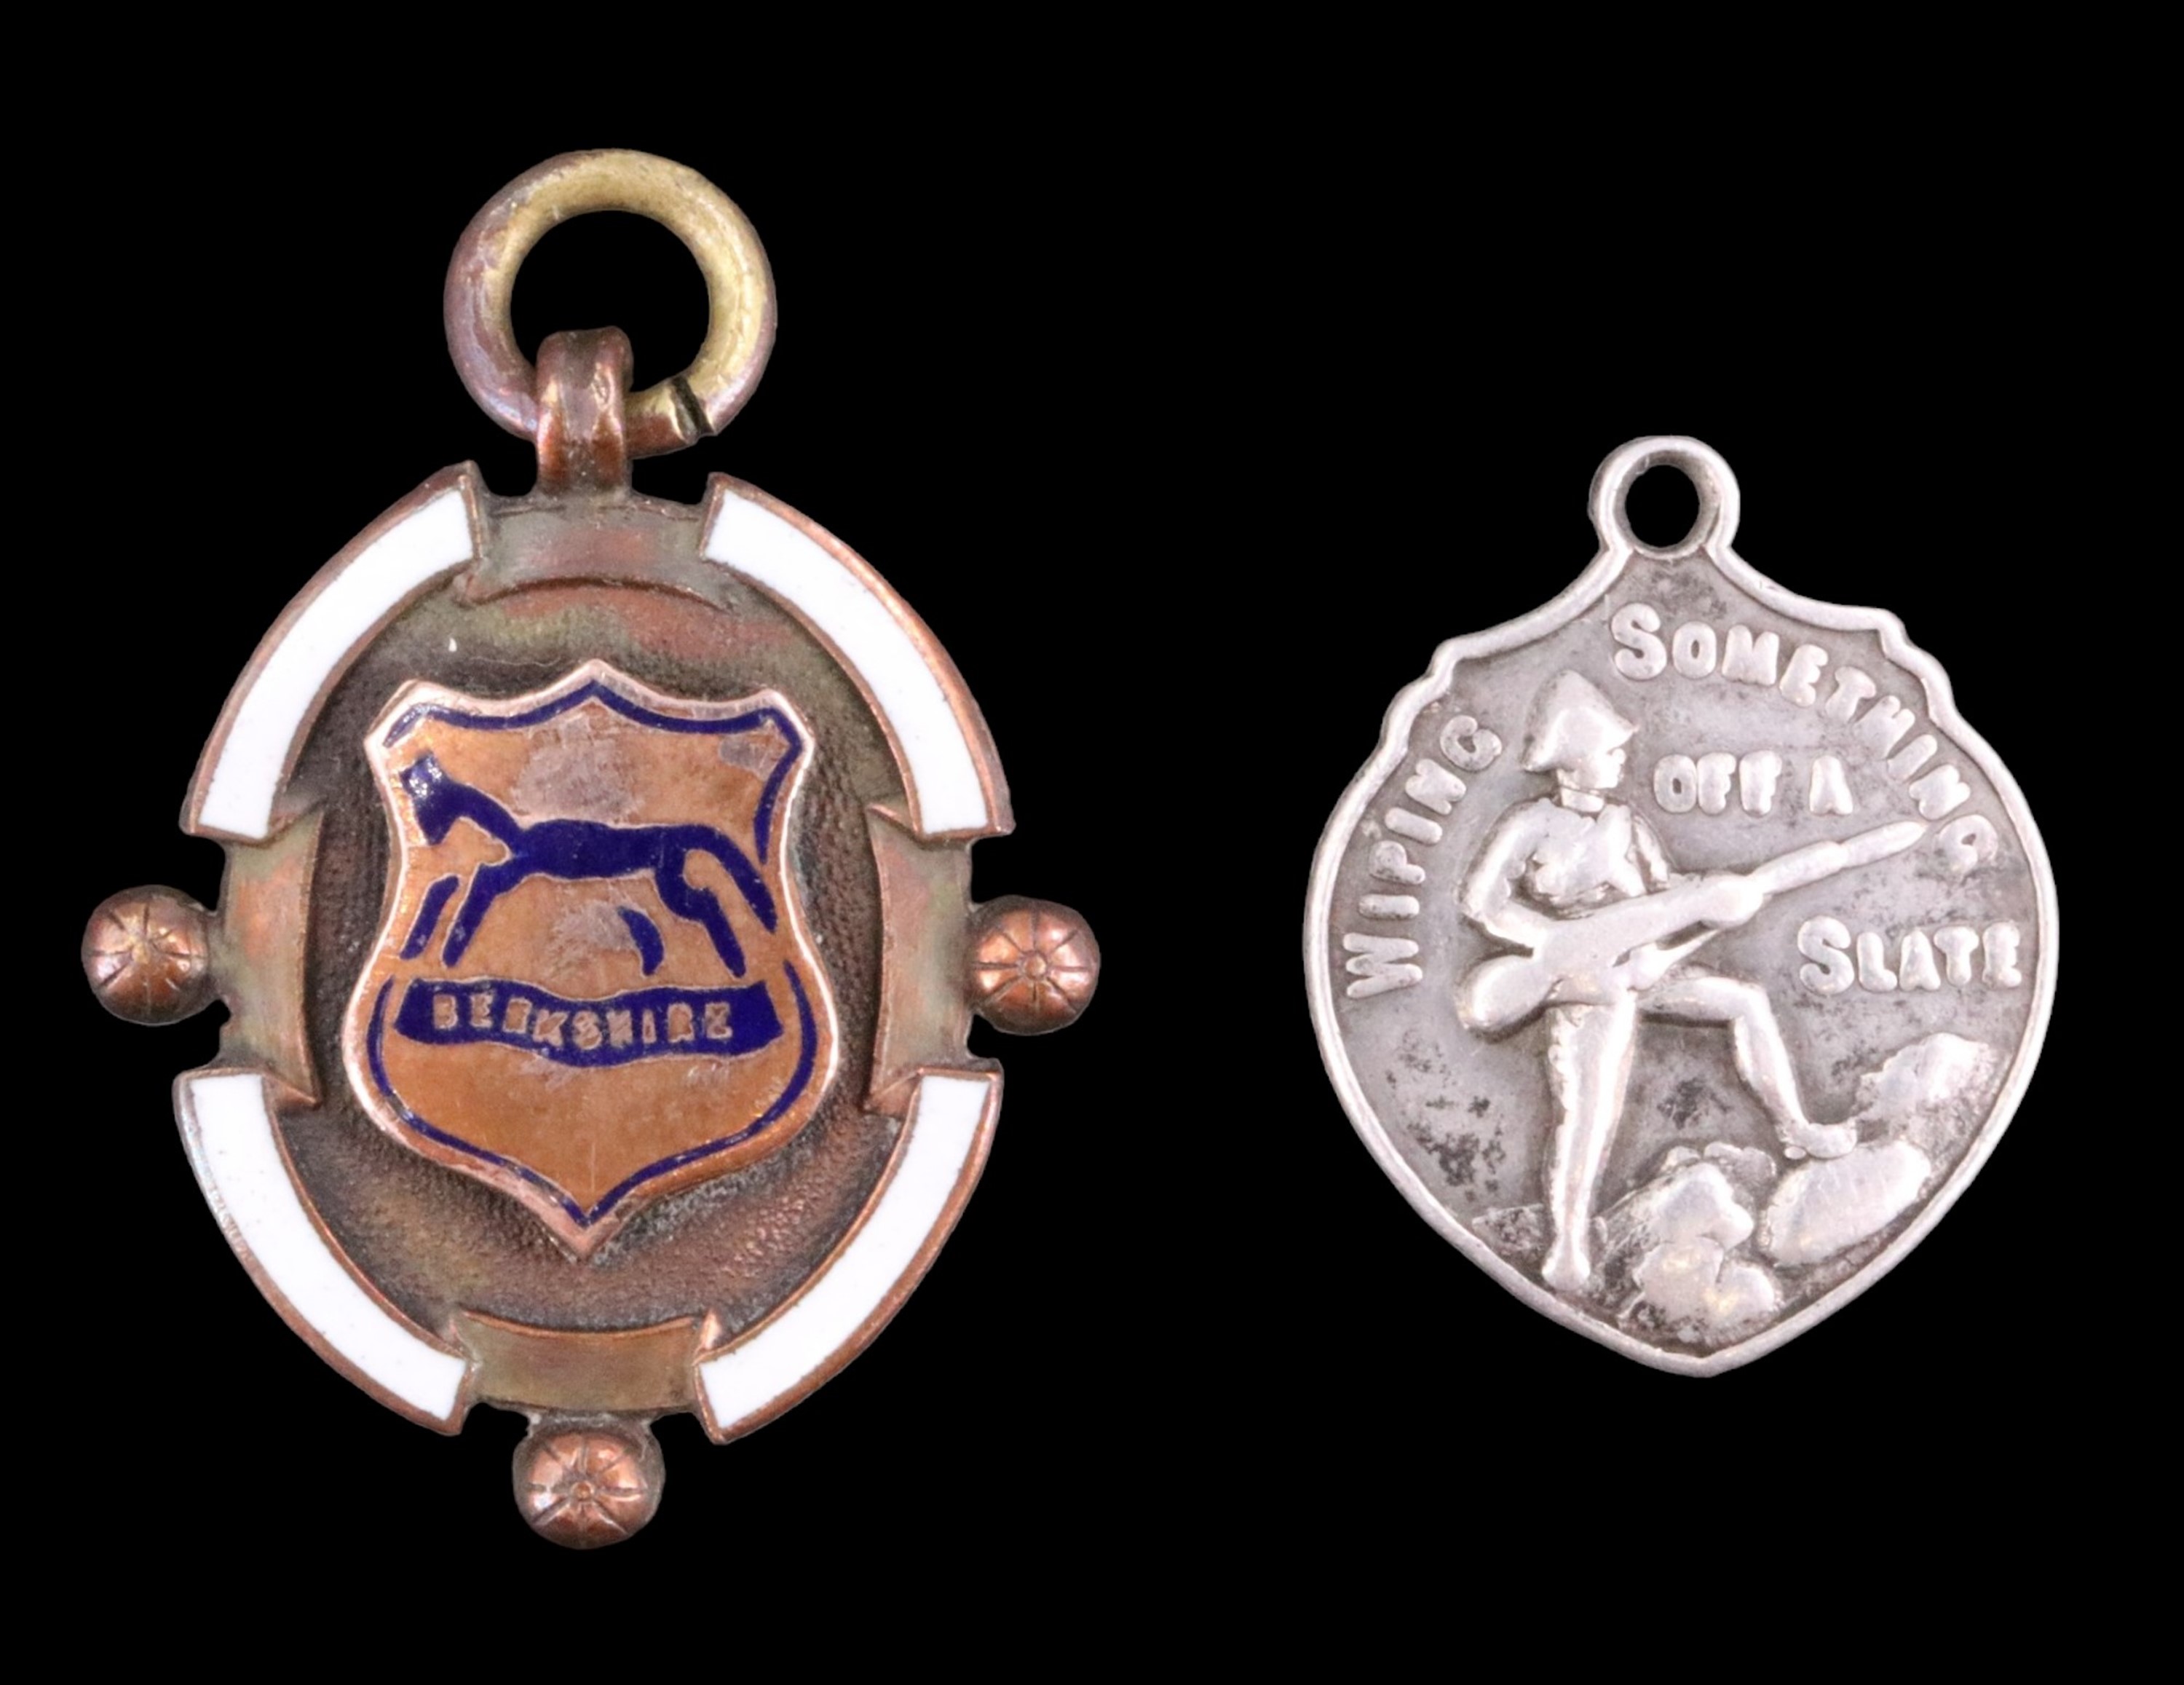 A Berkshire Yeomanry enamelled prize fob medallion together with a Boer War "Wiping Something off